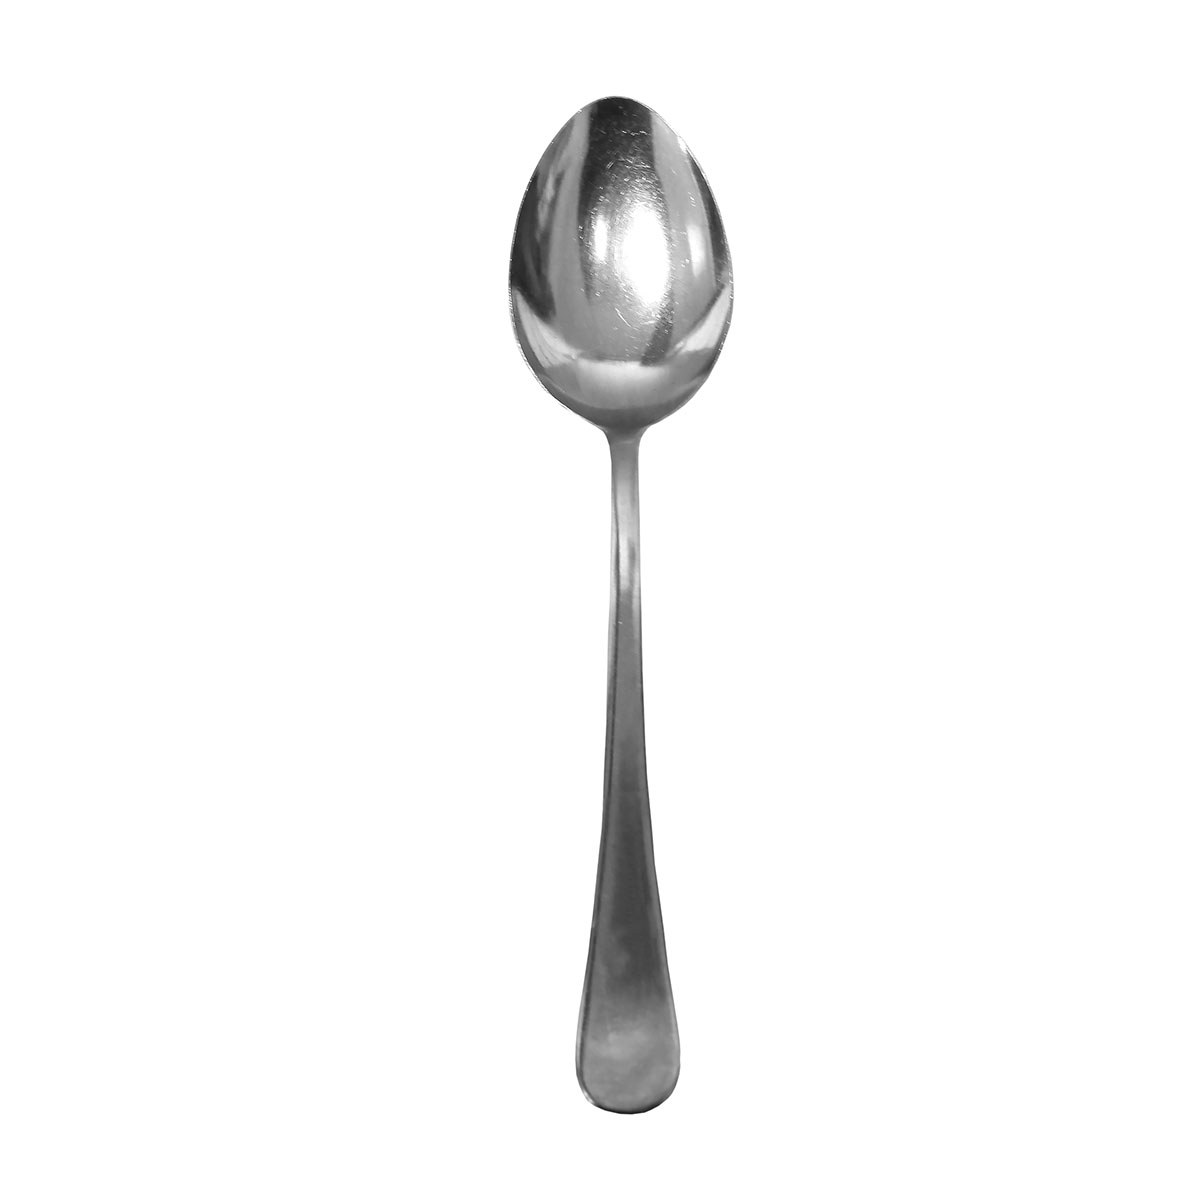 Tablespoon Plain (Usually used as a serving spoon)